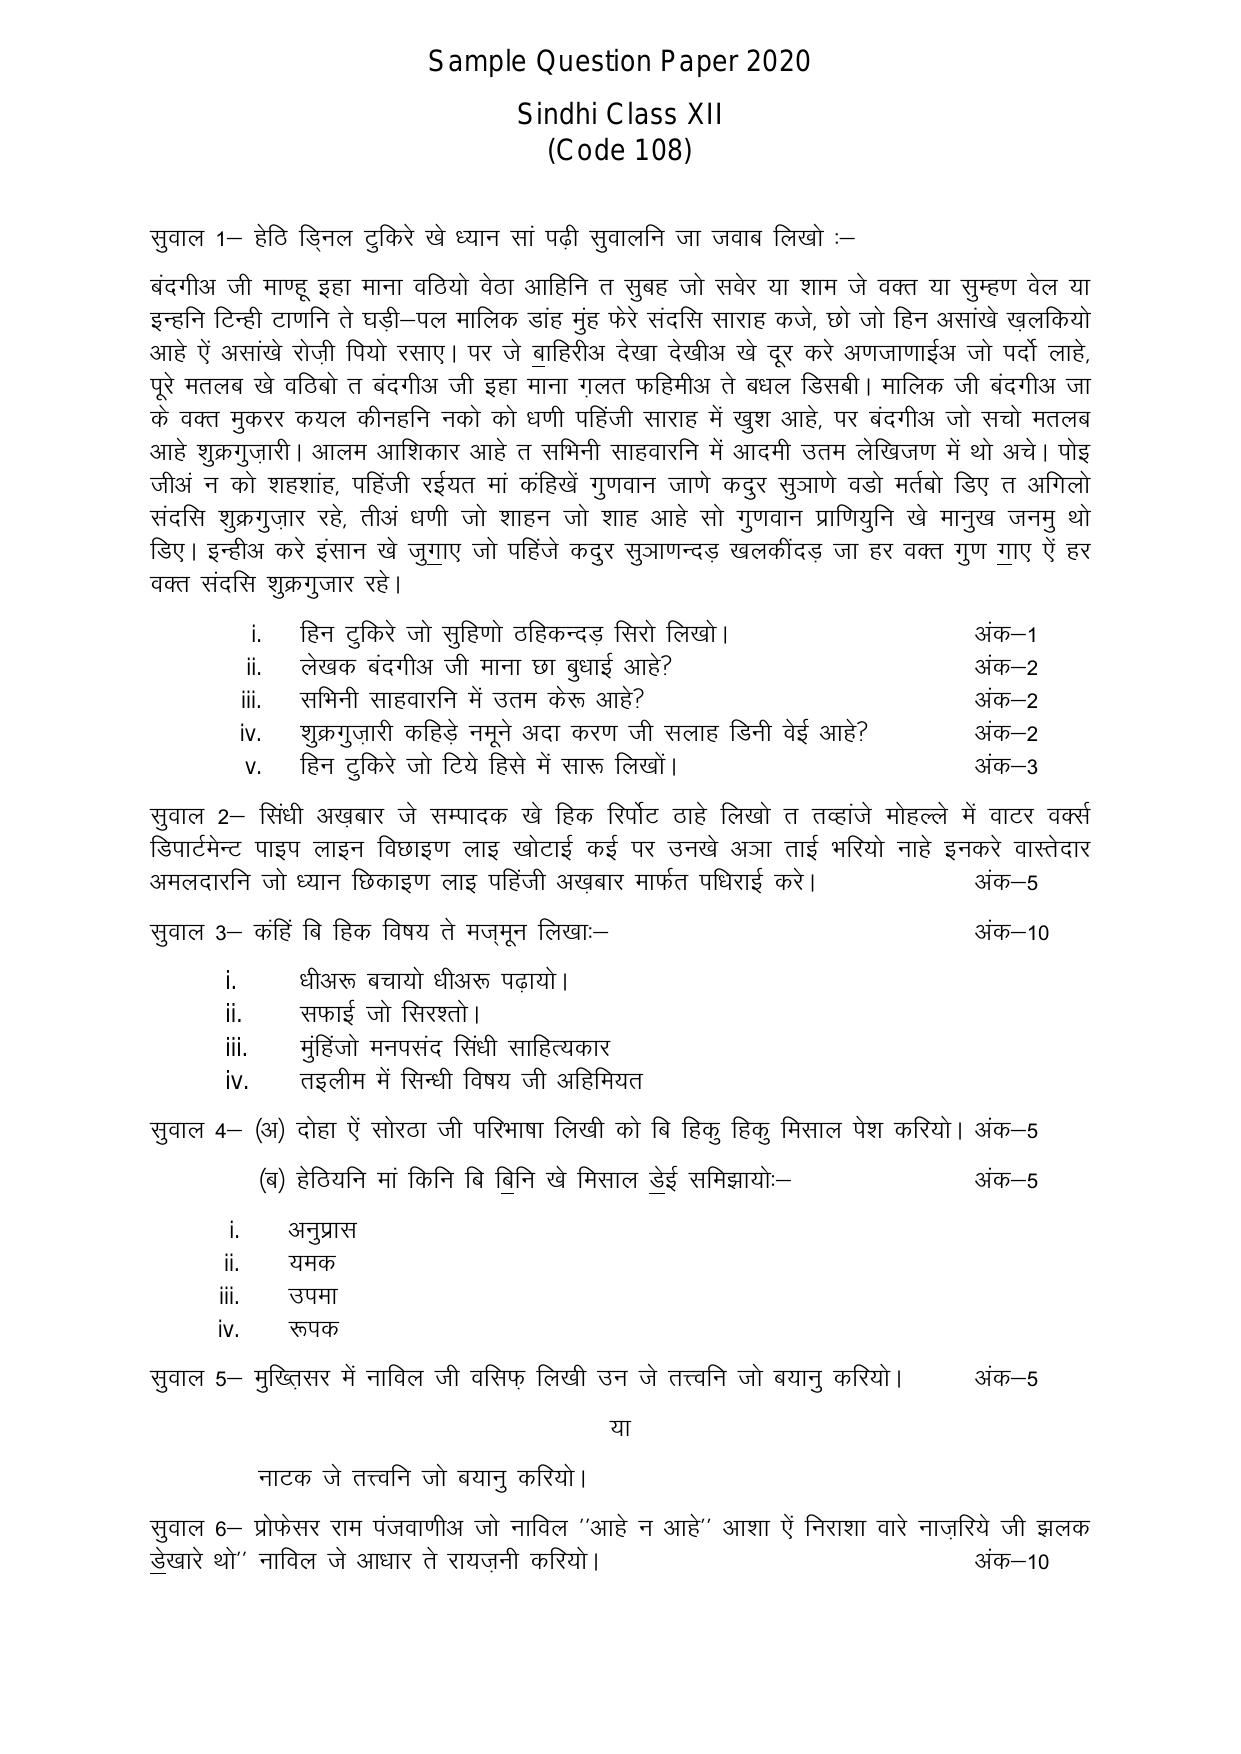 CBSE Class 12 Sindhi -Sample Paper 2019-20 - Page 1